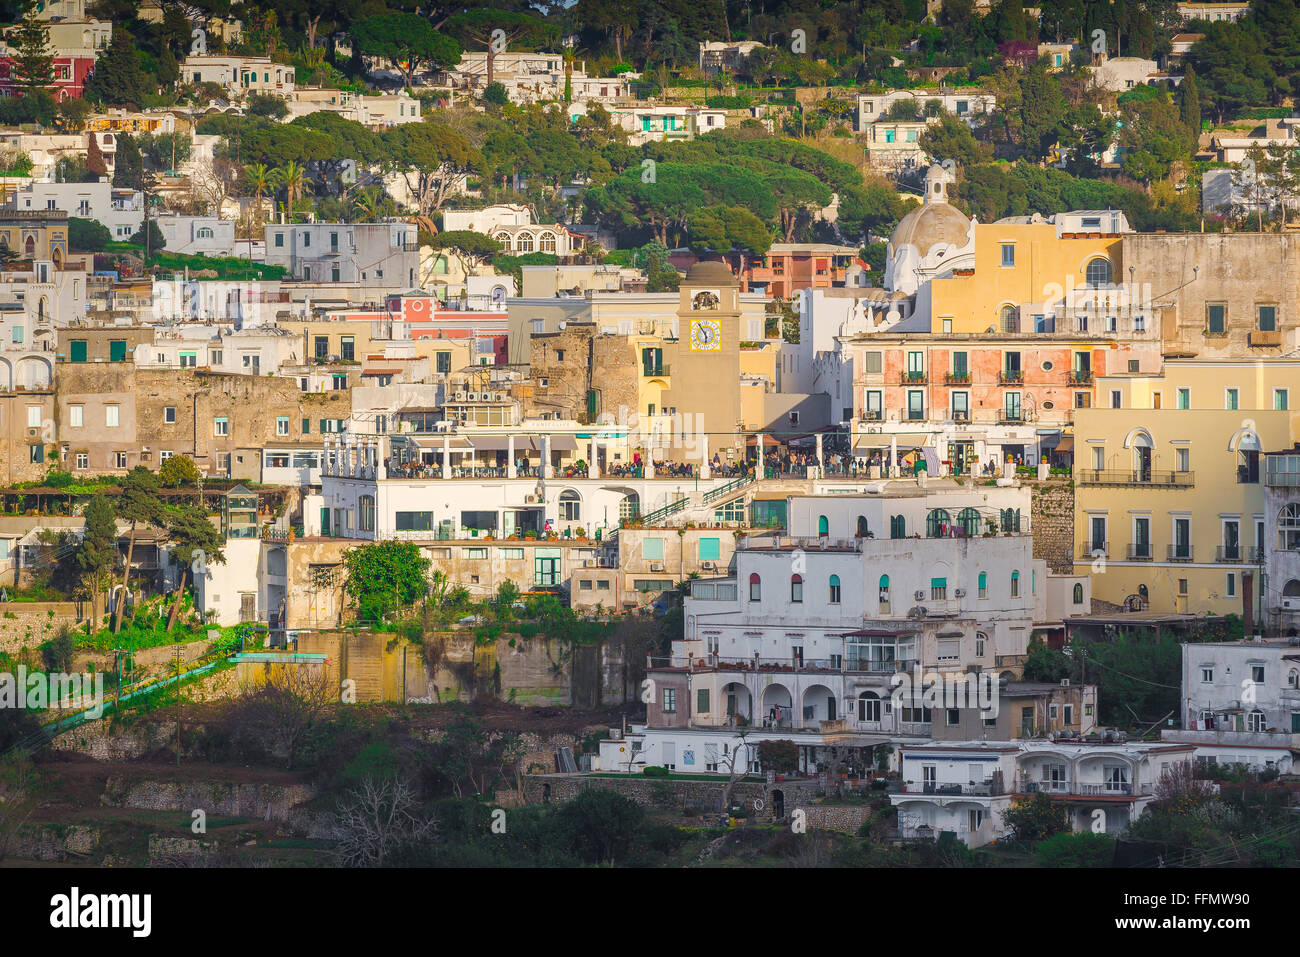 Capri town center, view of the main town on Capri island with the central meeting place, the Piazetta, visible in the centre, Campania, Italy. Stock Photo